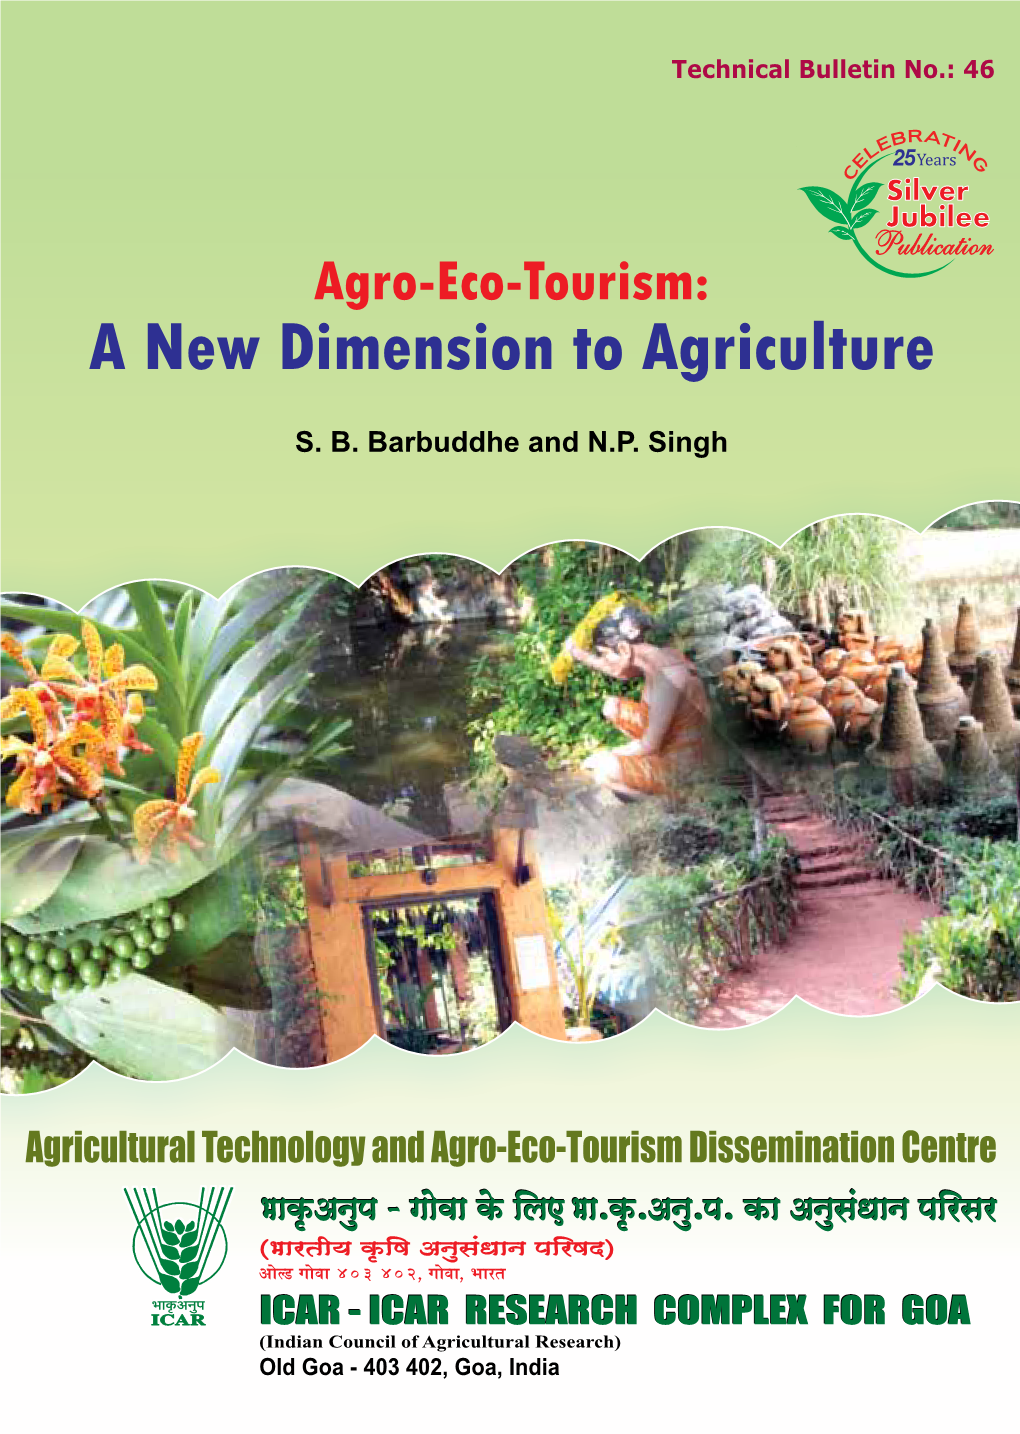 Agro-Eco-Tourism: a New Dimension to Agriculture